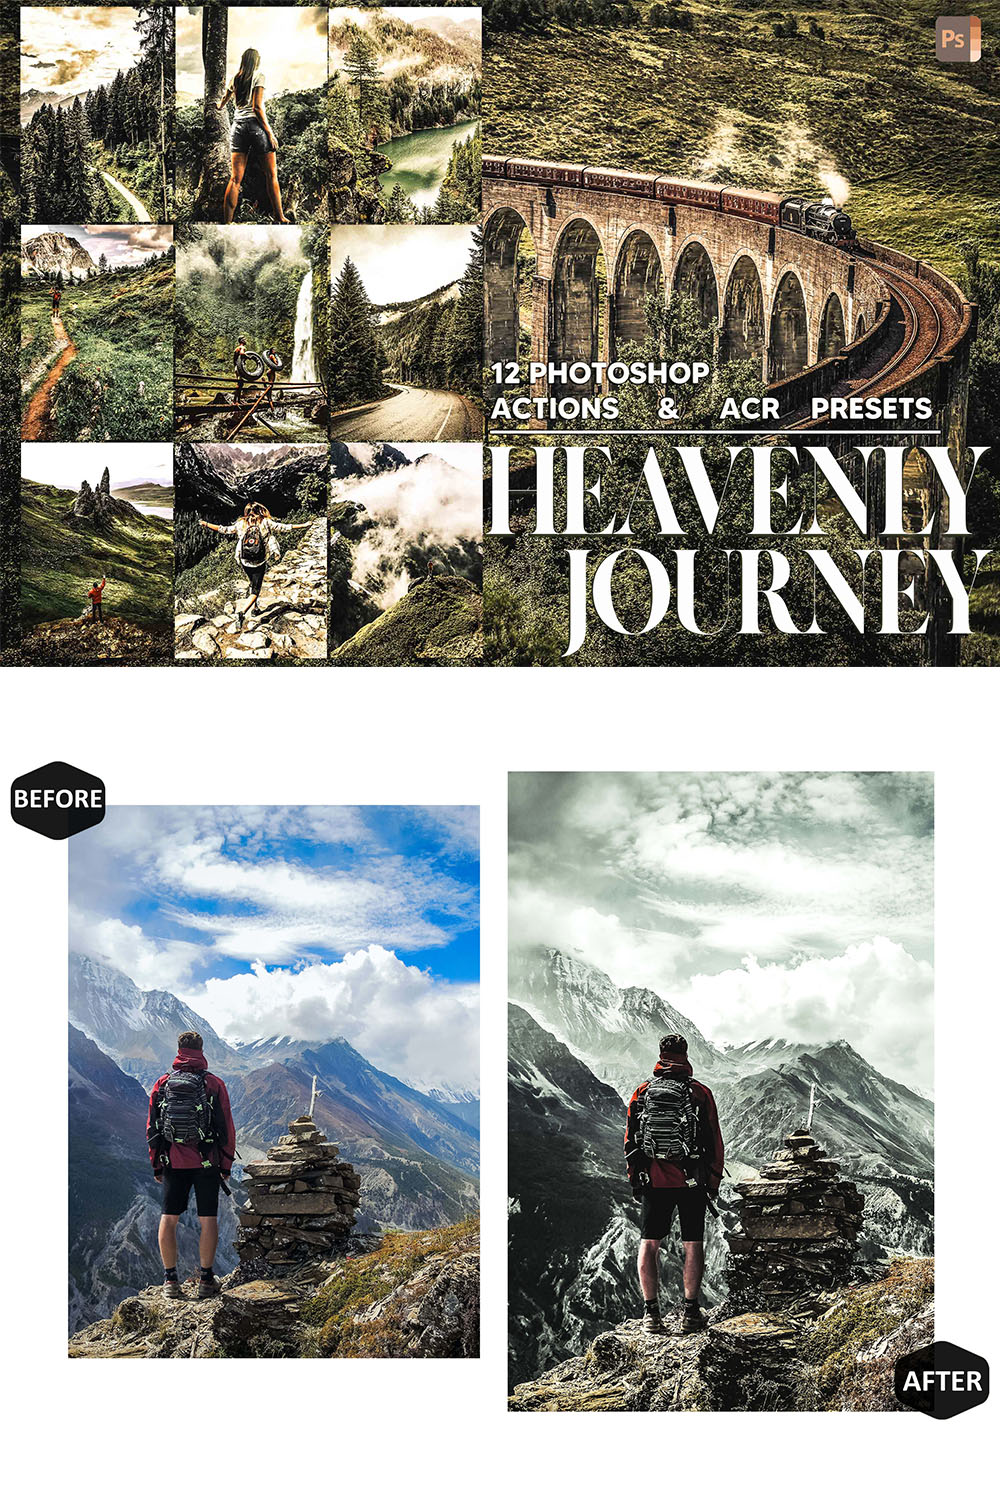 12 Photoshop Actions, Heavenly Journey Ps Action, Light ACR Preset, Moody Ps Filter, Atn Portrait And Best Theme For Instagram, Blogger pinterest preview image.